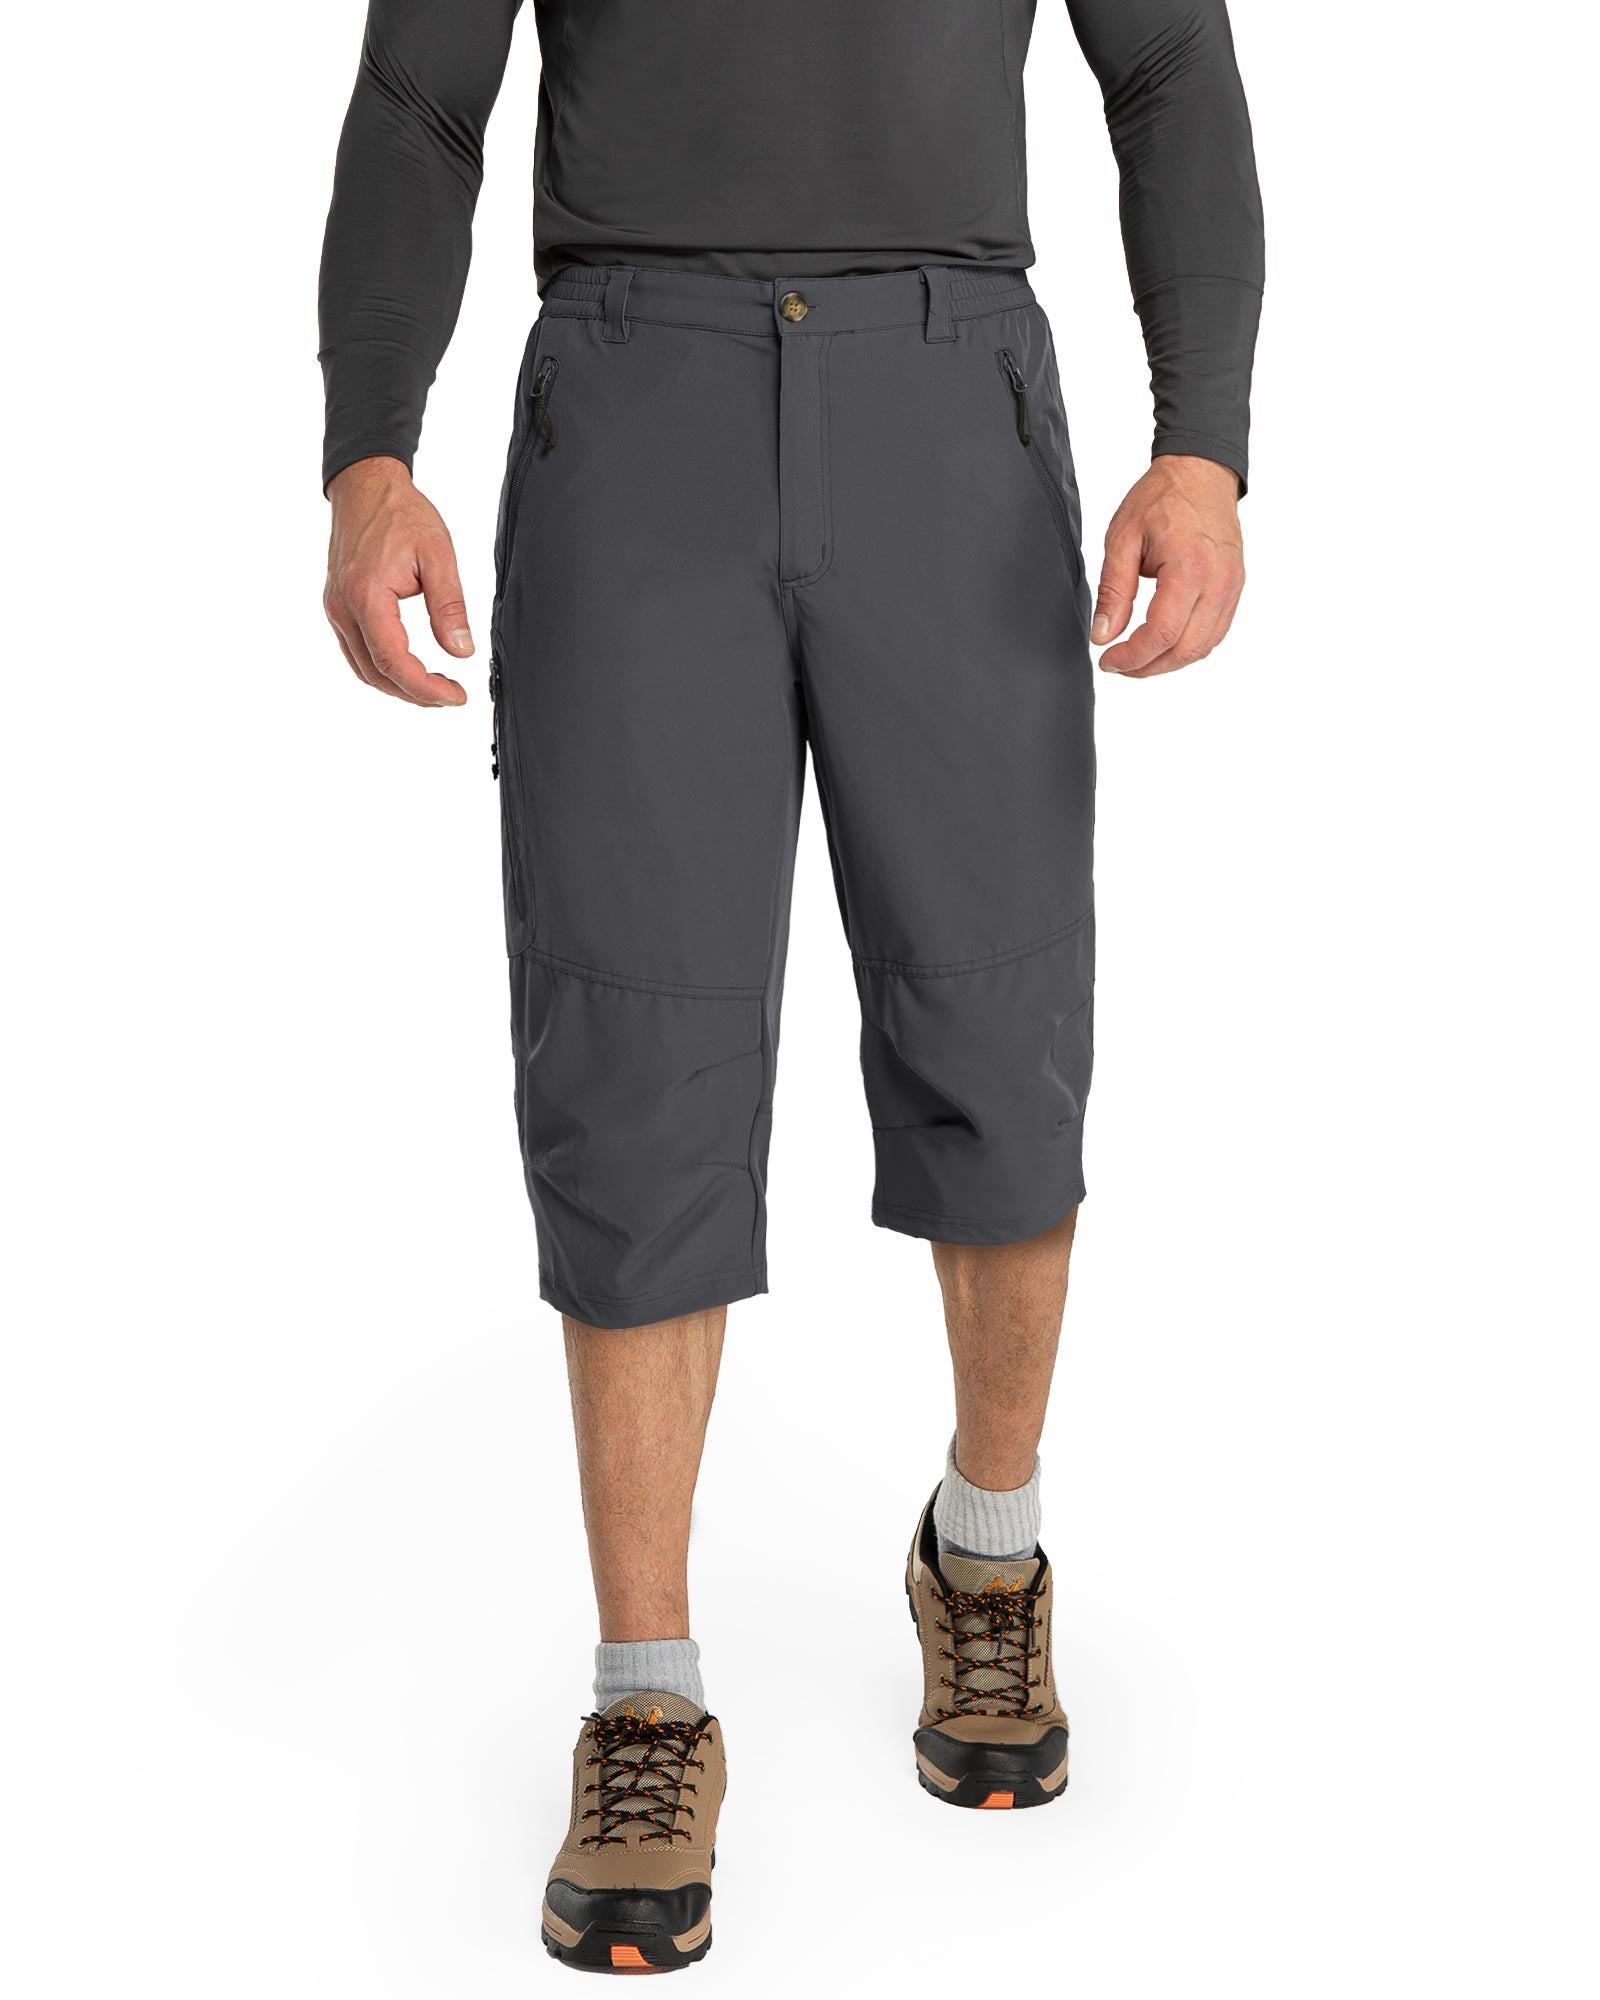 SHEFLY Go There Multi-Fly Hiking Pants - Save 53%